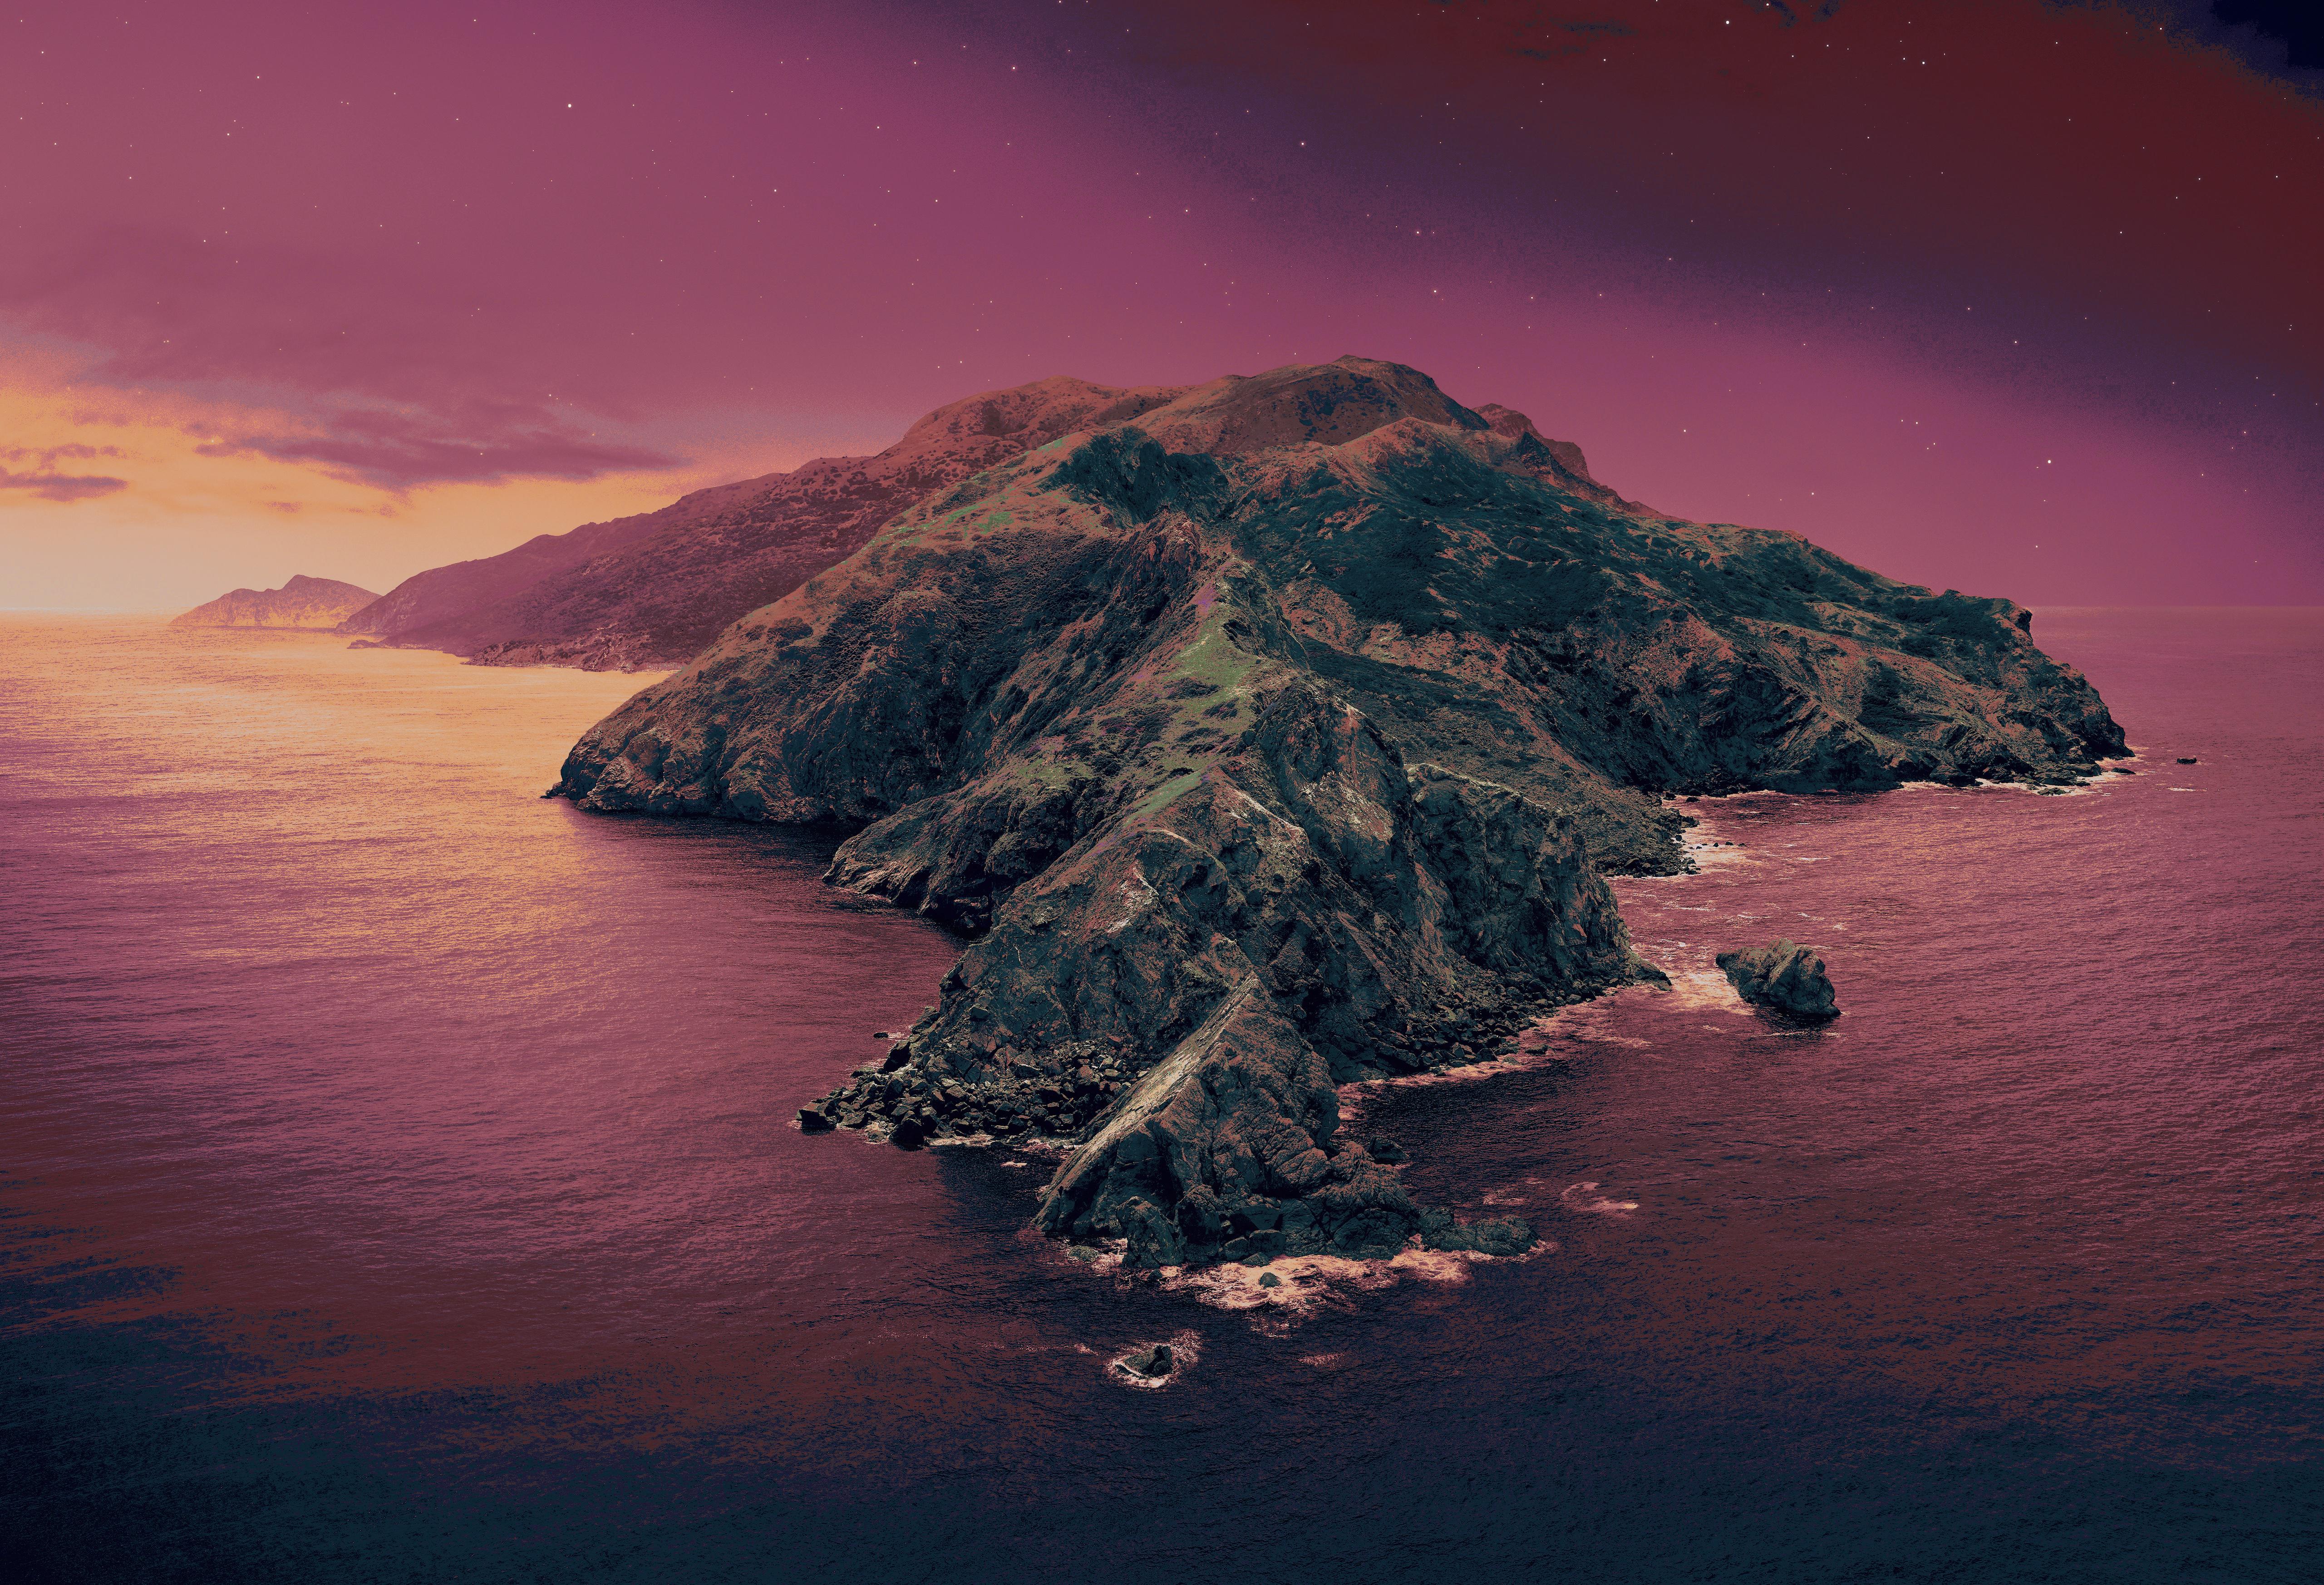 Catalina 4K wallpaper for your desktop or mobile screen free and easy to download